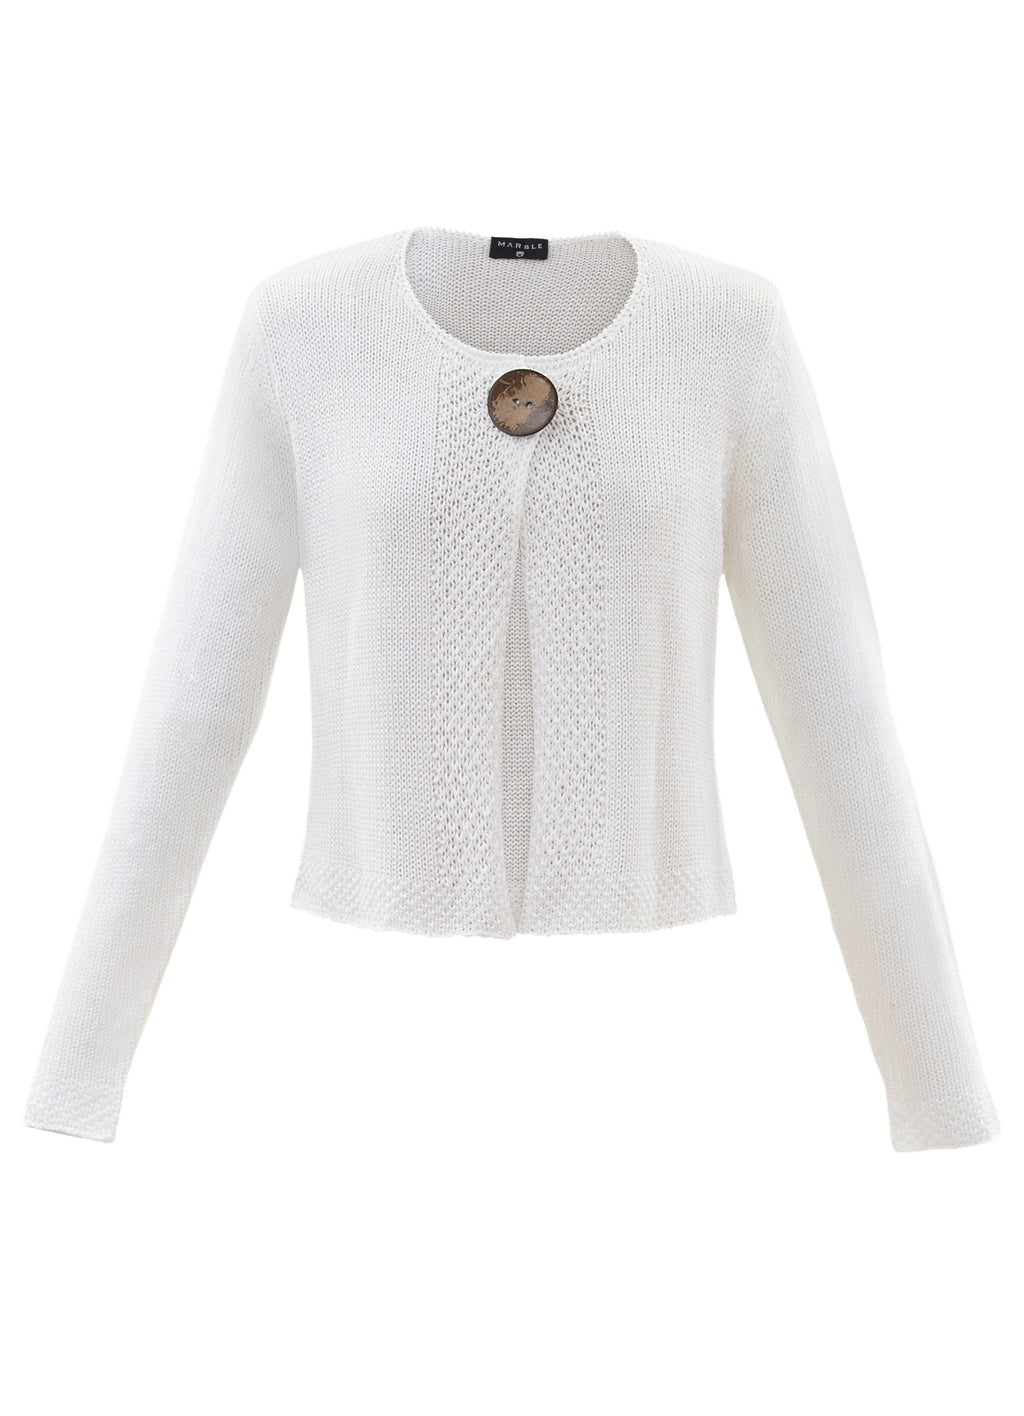 <p>Marble woven knit crop cardigan with large singular button closure in white </p>
<p>Product code 6515-102</p>